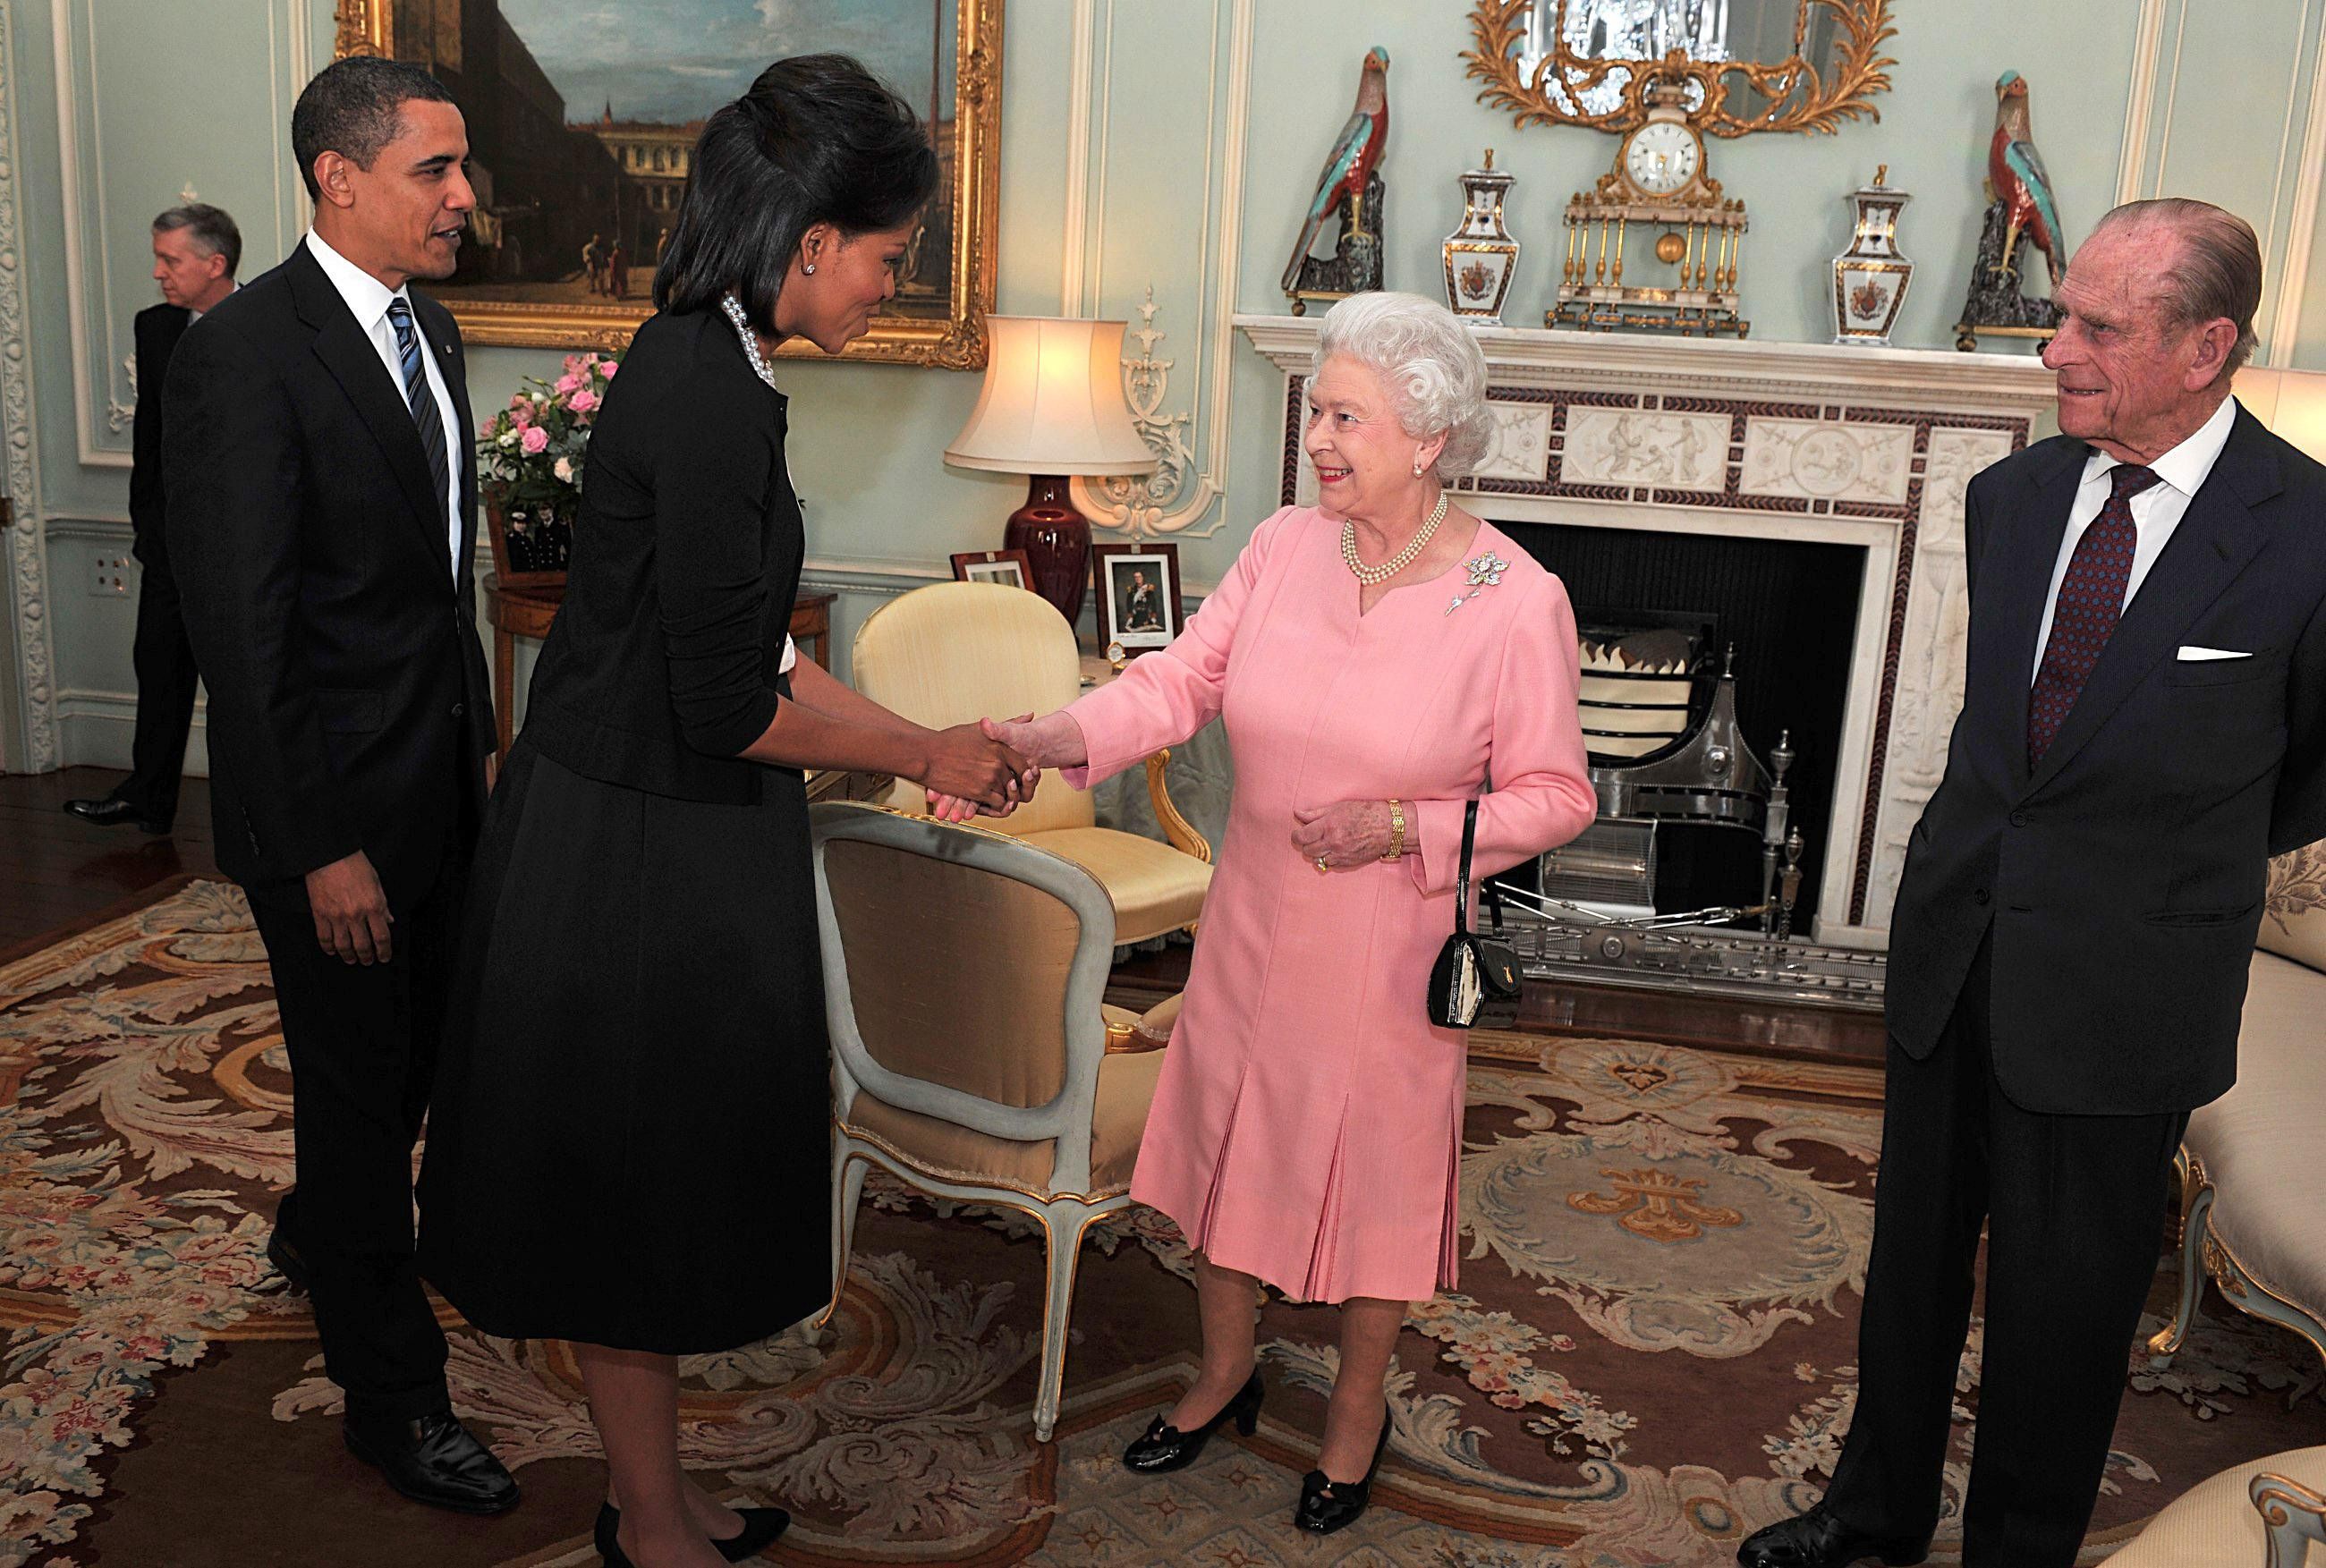 Barack Obama and Michelle Obama meet with Queen Elizabeth II and Prince Philip, Duke of Edinburgh at Buckingham Palace on April 1, 2009 in London, England. | Photo: Getty Images.